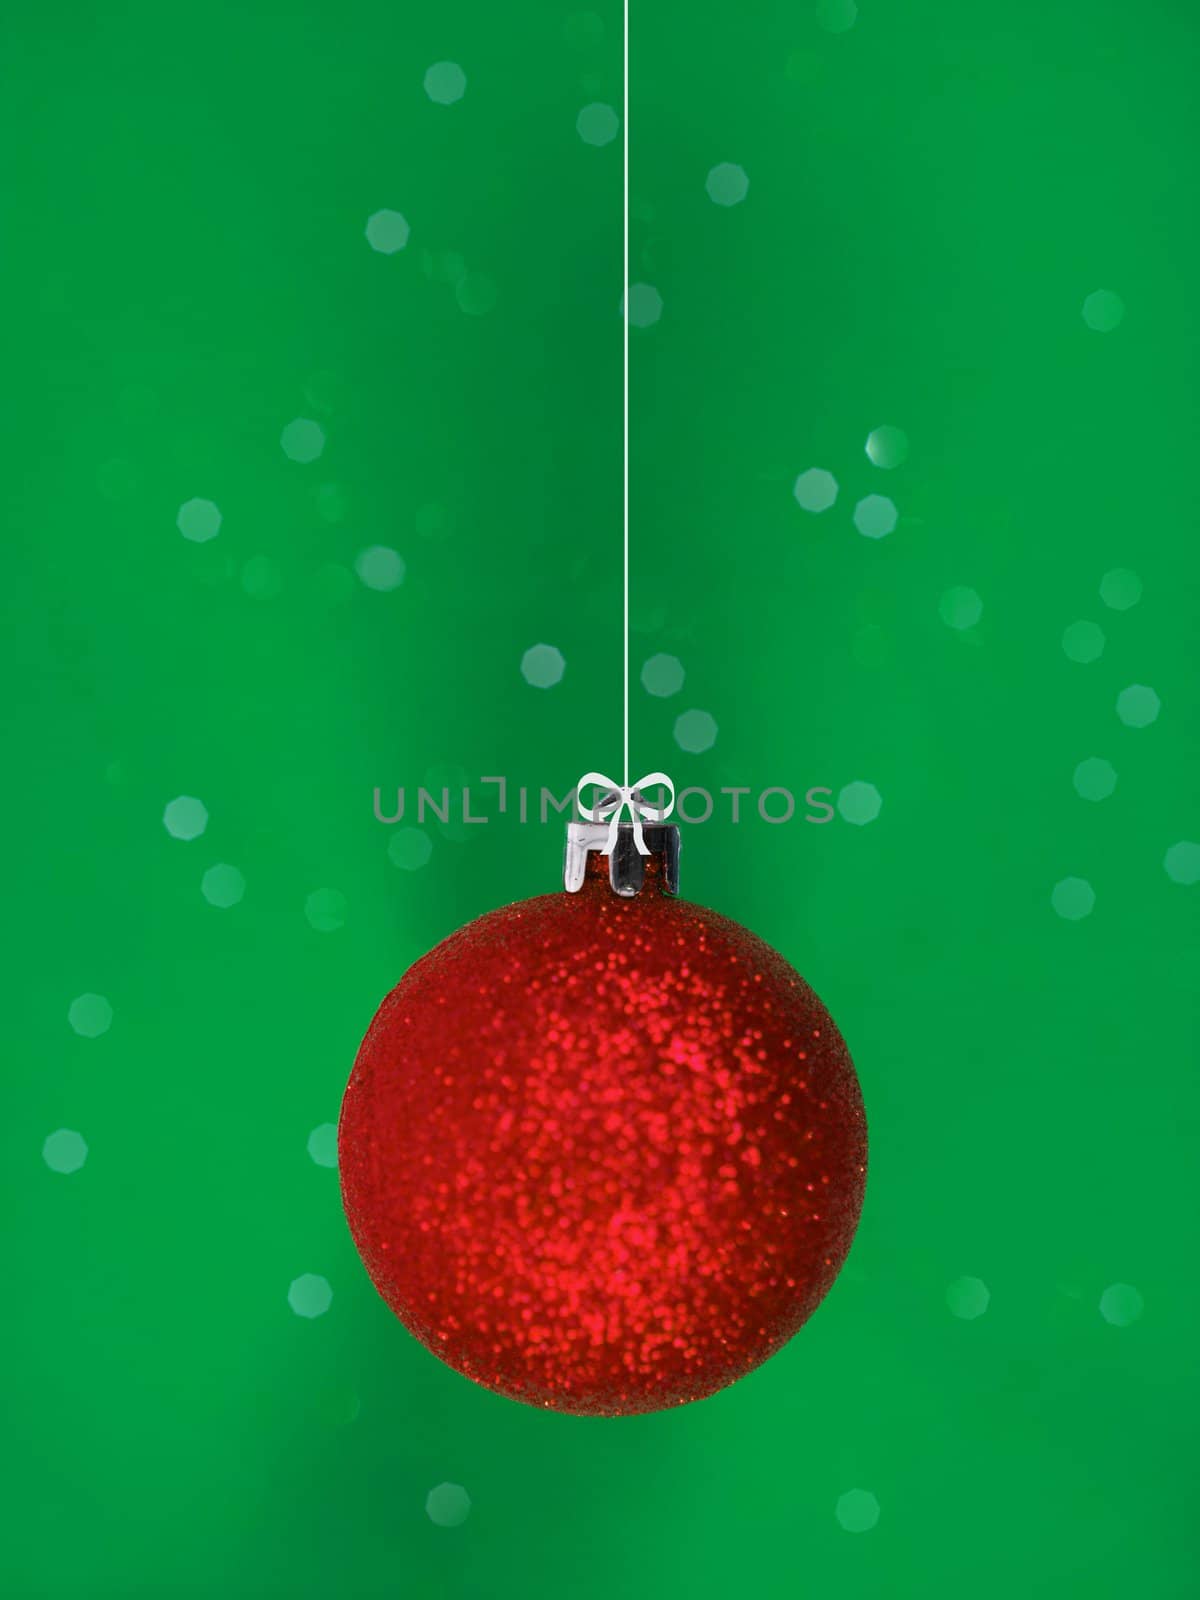 Christmas ornaments and items shot in studio